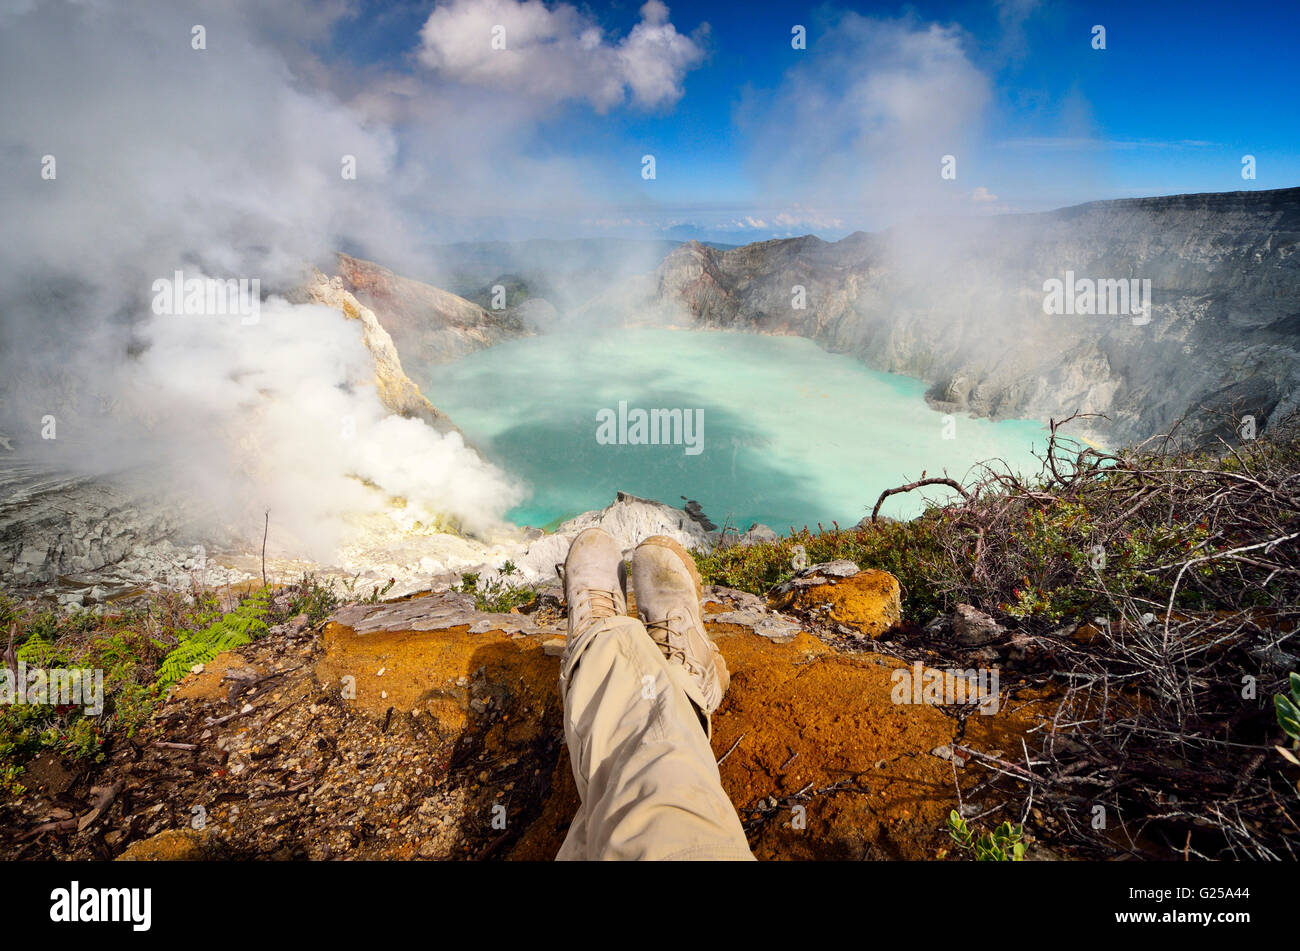 Man looking at view, Ljen volcano, East Java, Indonesia Stock Photo